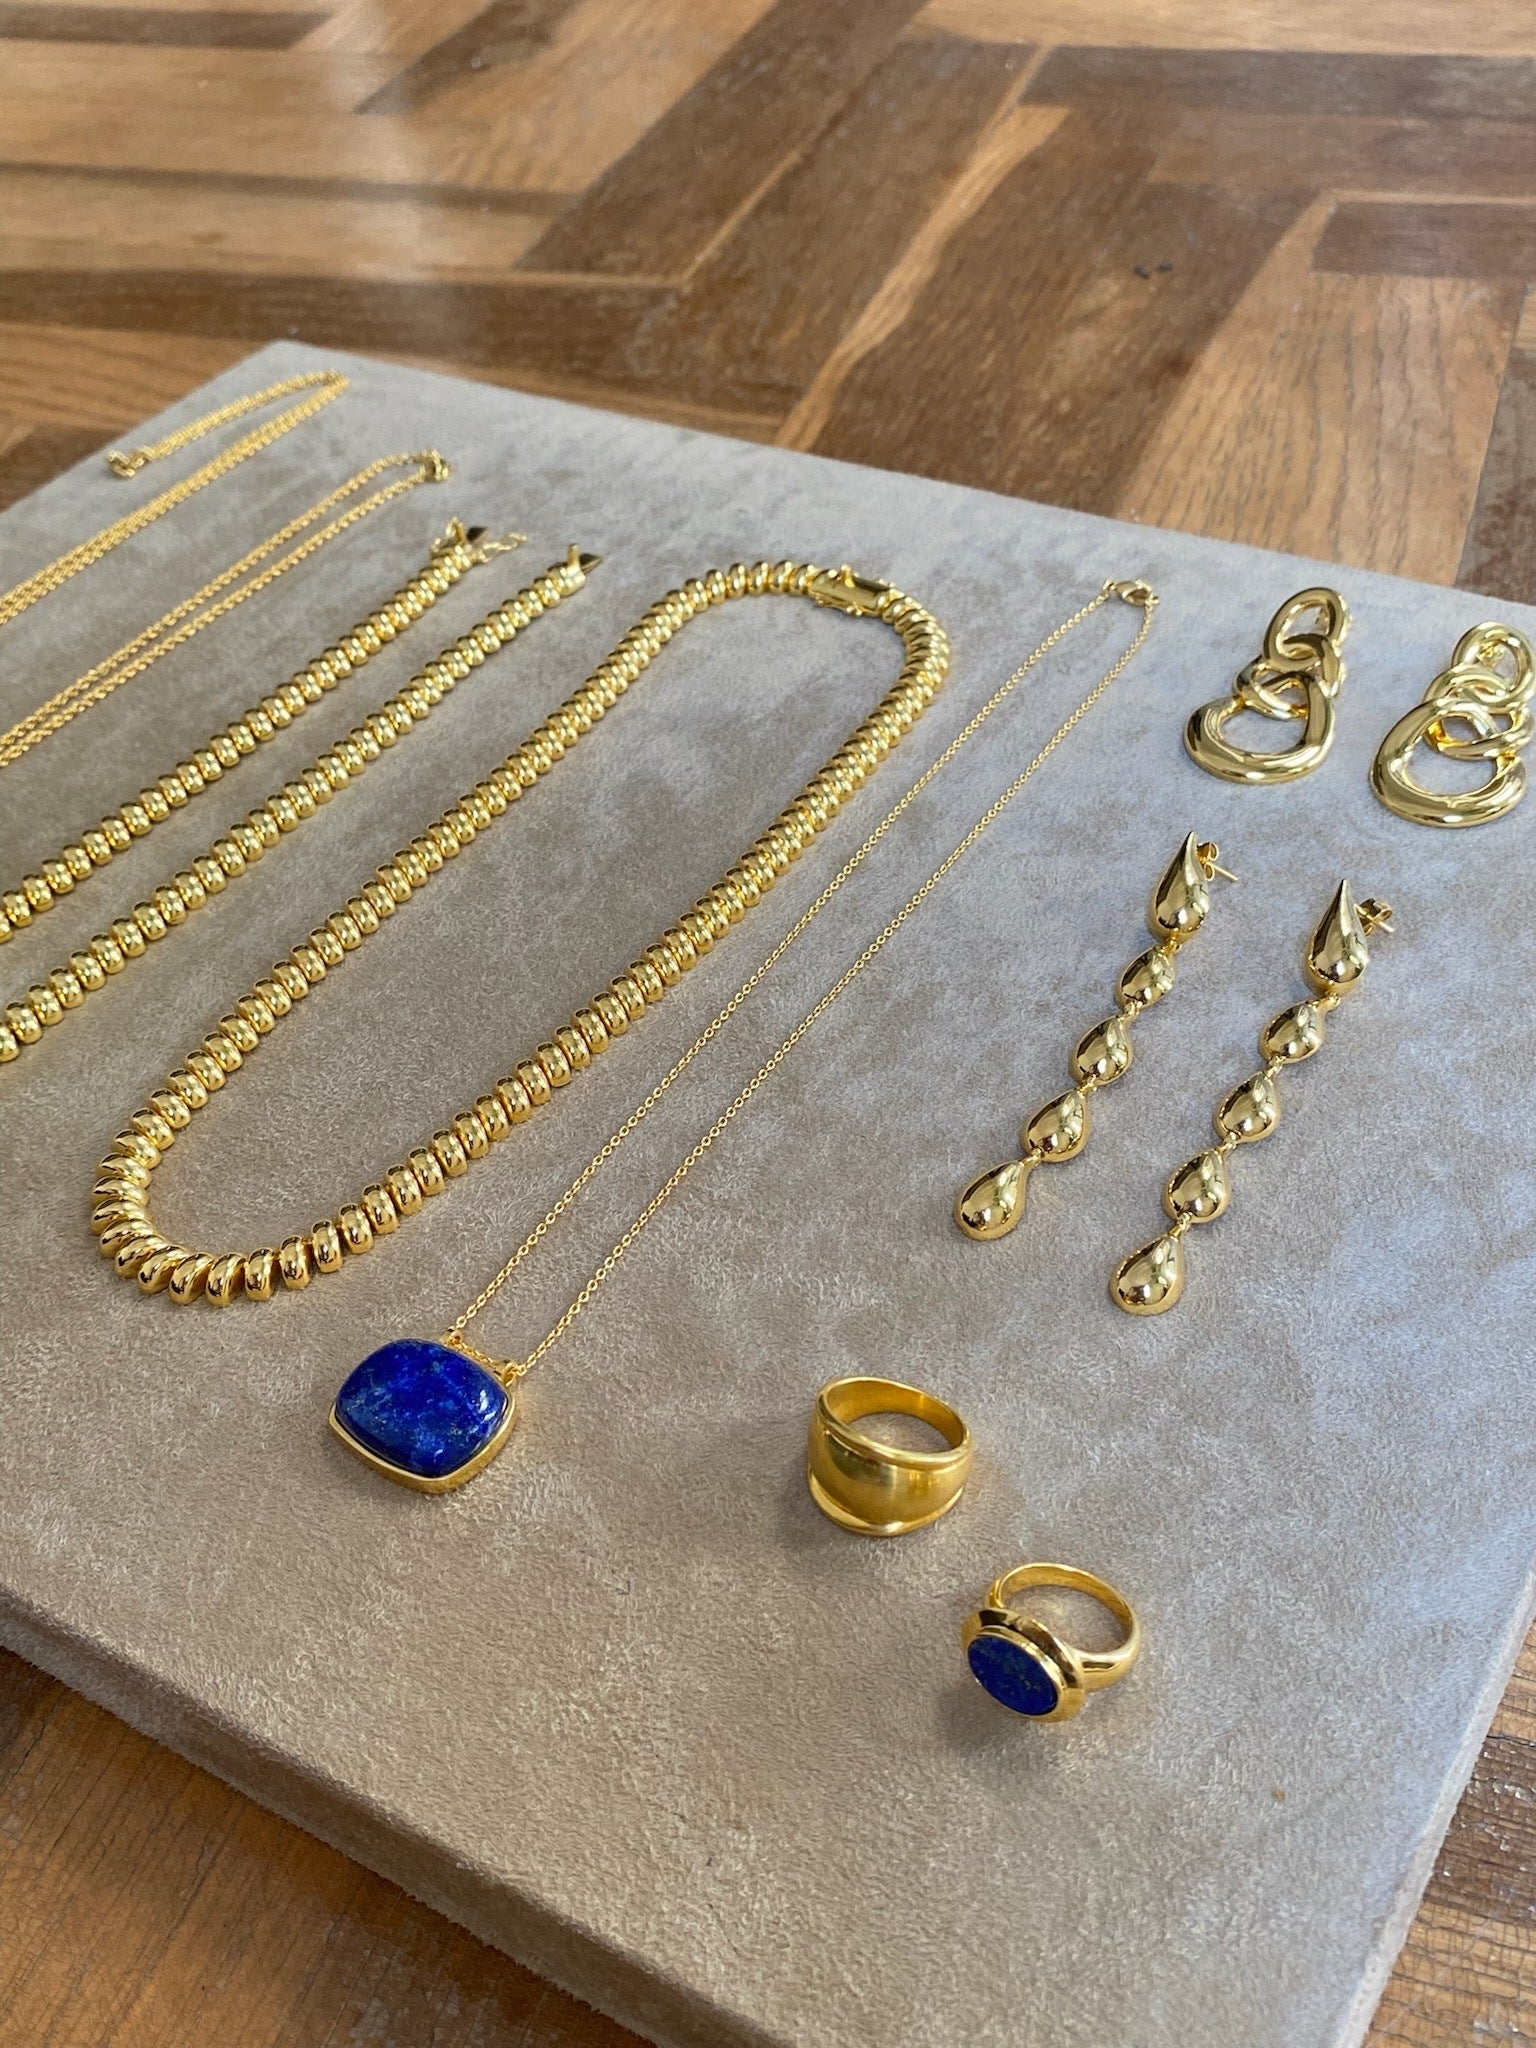 What Is Gold Plated Jewellery?